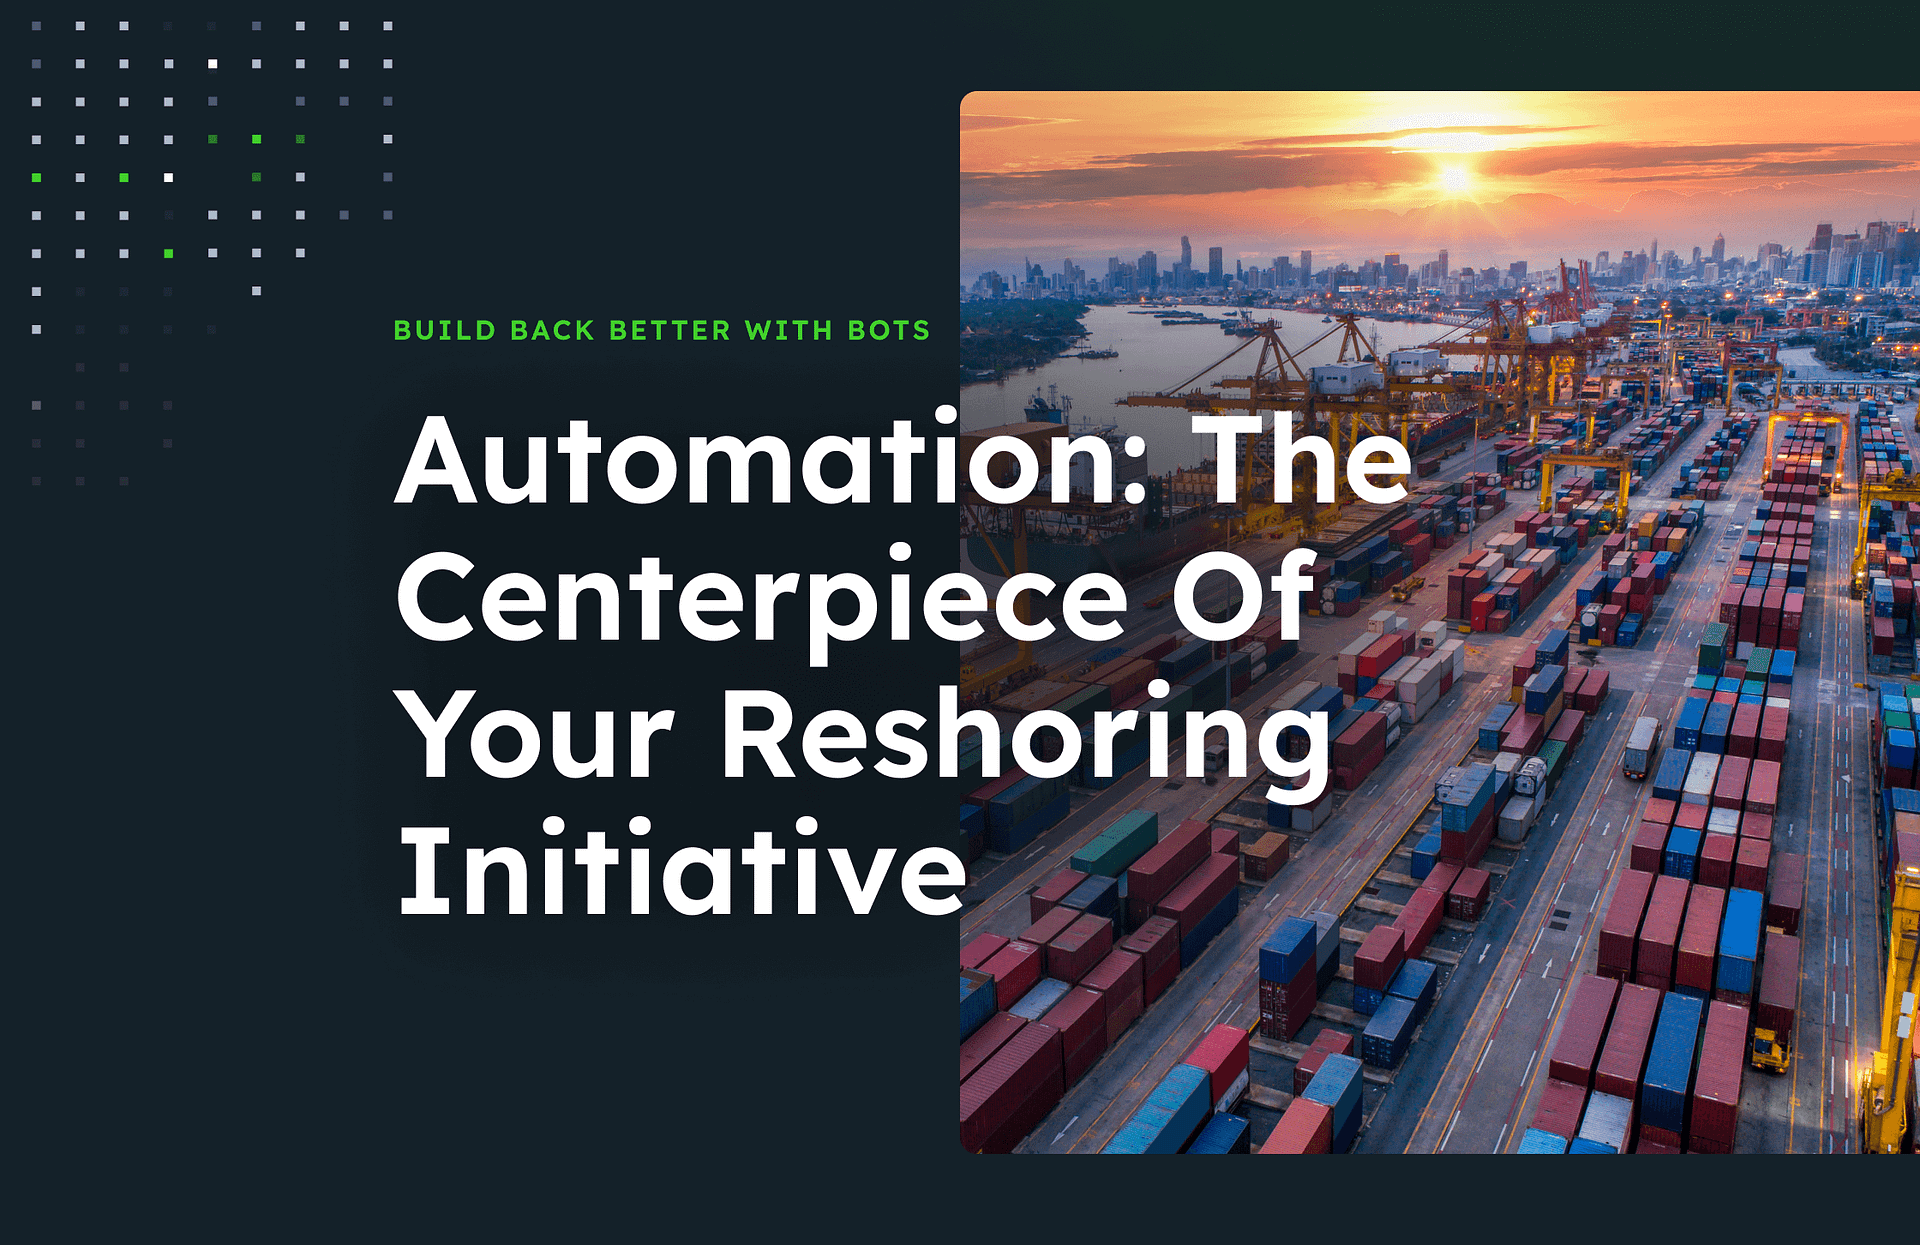 Automation the centerpiece of your reshoring initiative text on a half black background and image of shipping containers